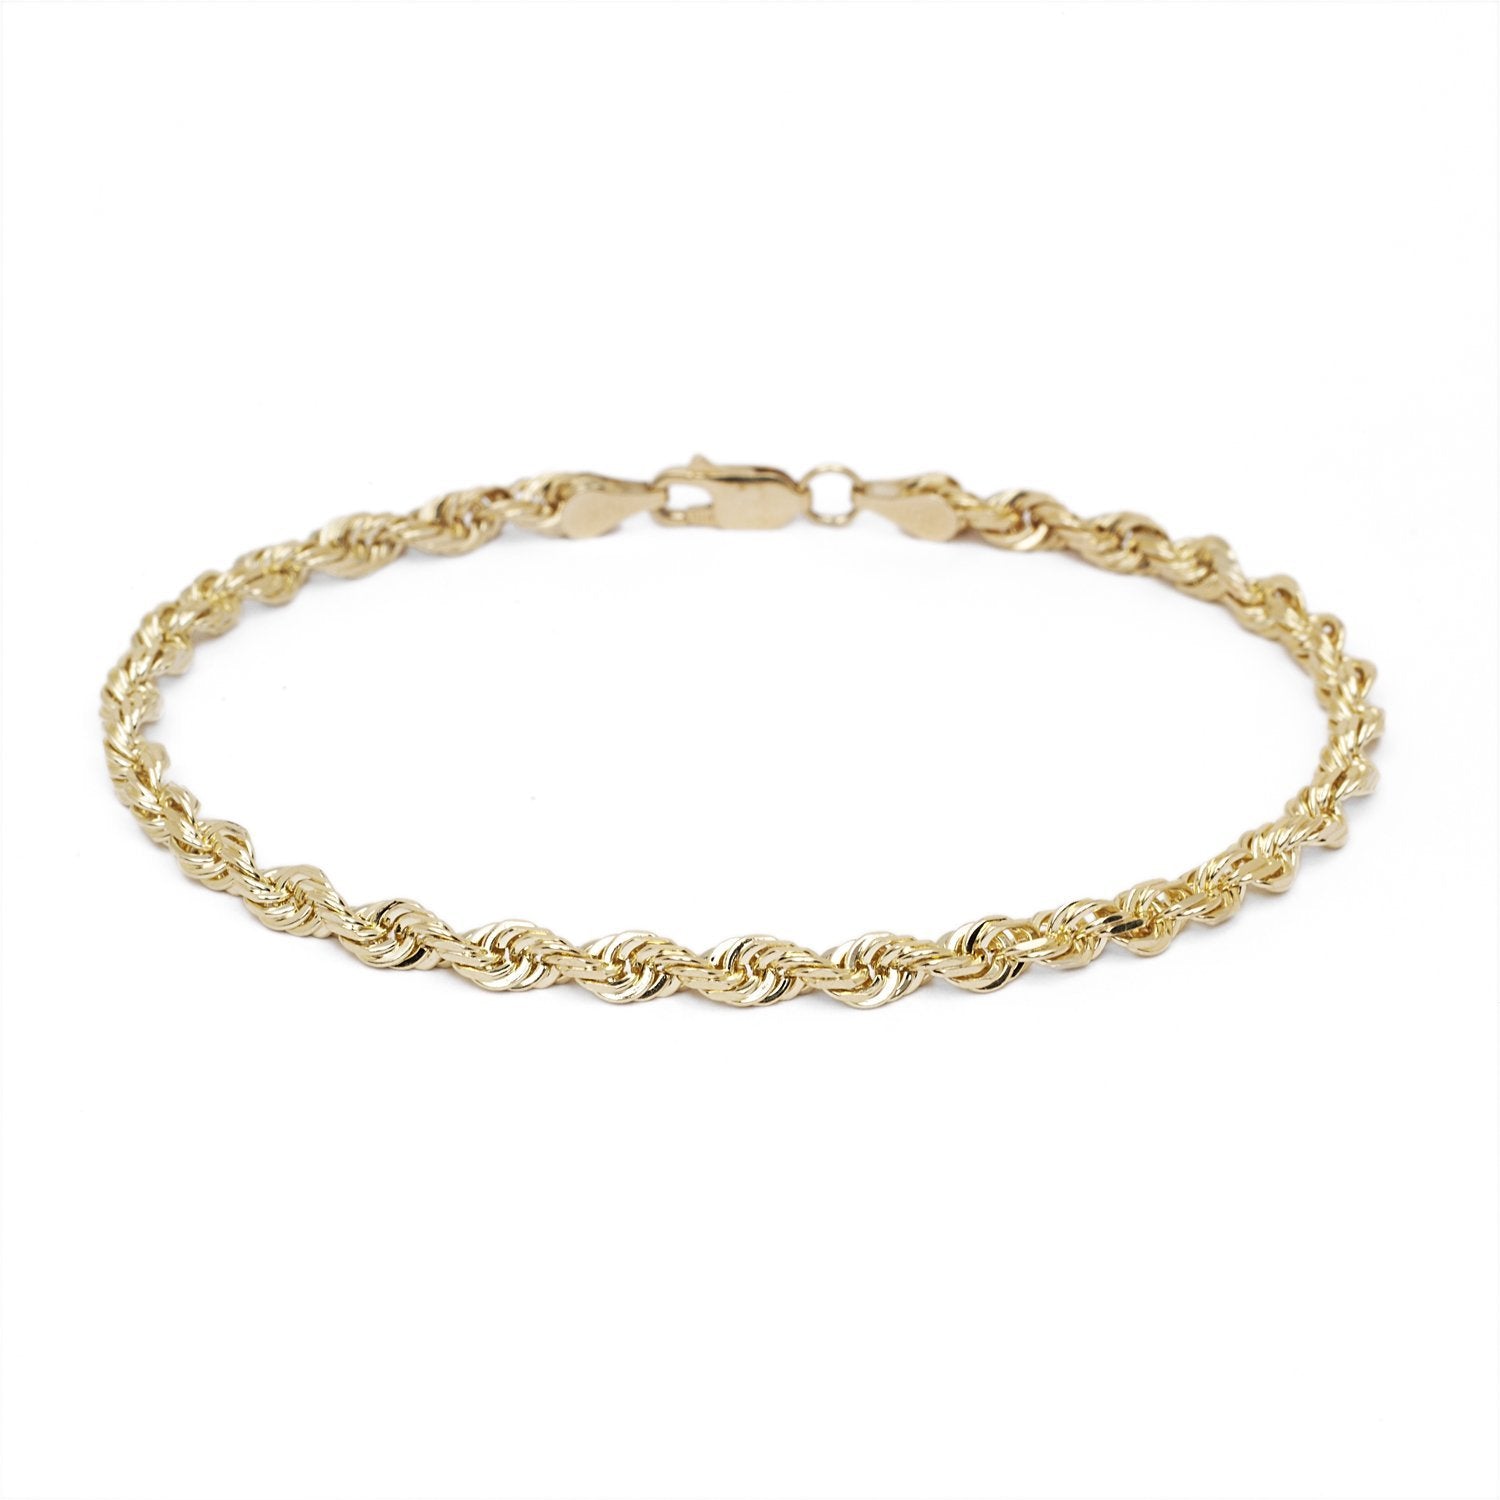 10k Yellow Gold Hollow Rope Chain Bracelet and Anklet for Men & Women, 3mm